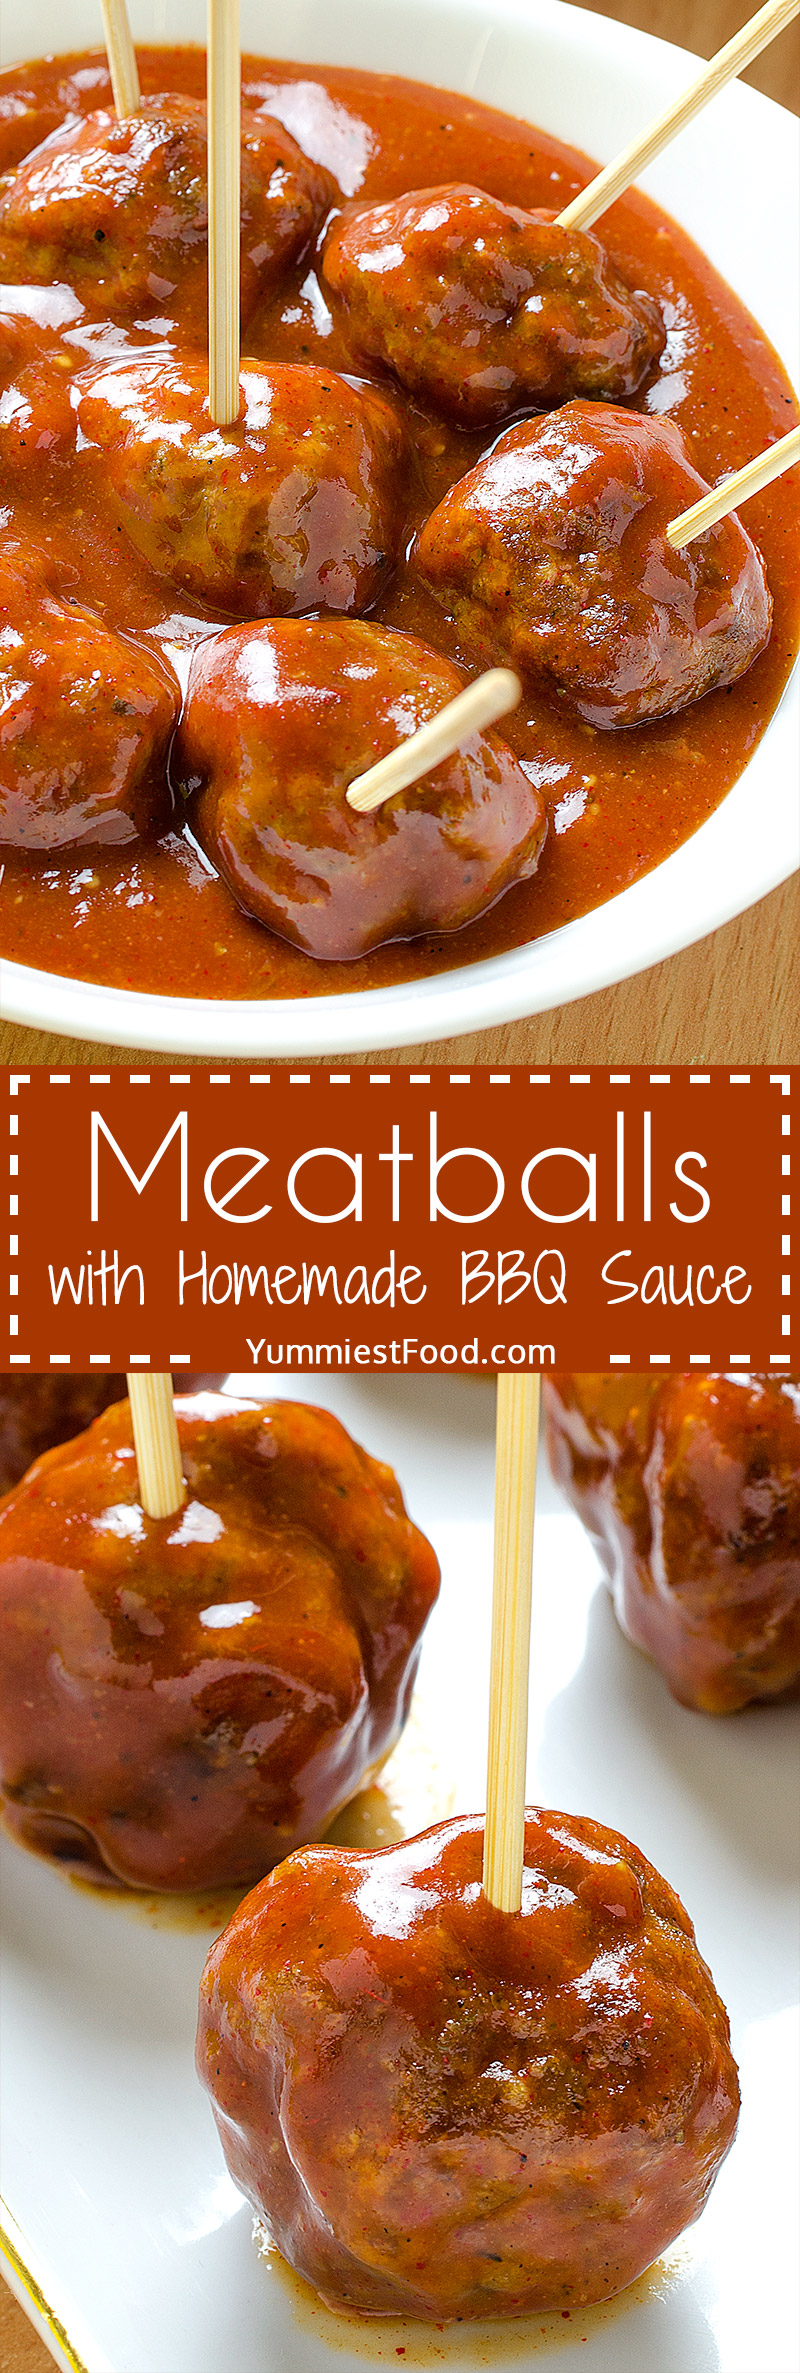 Meatballs with Homemade BBQ Sauce - such simple and easy meatball recipe. Super tasty and perfect for game day.